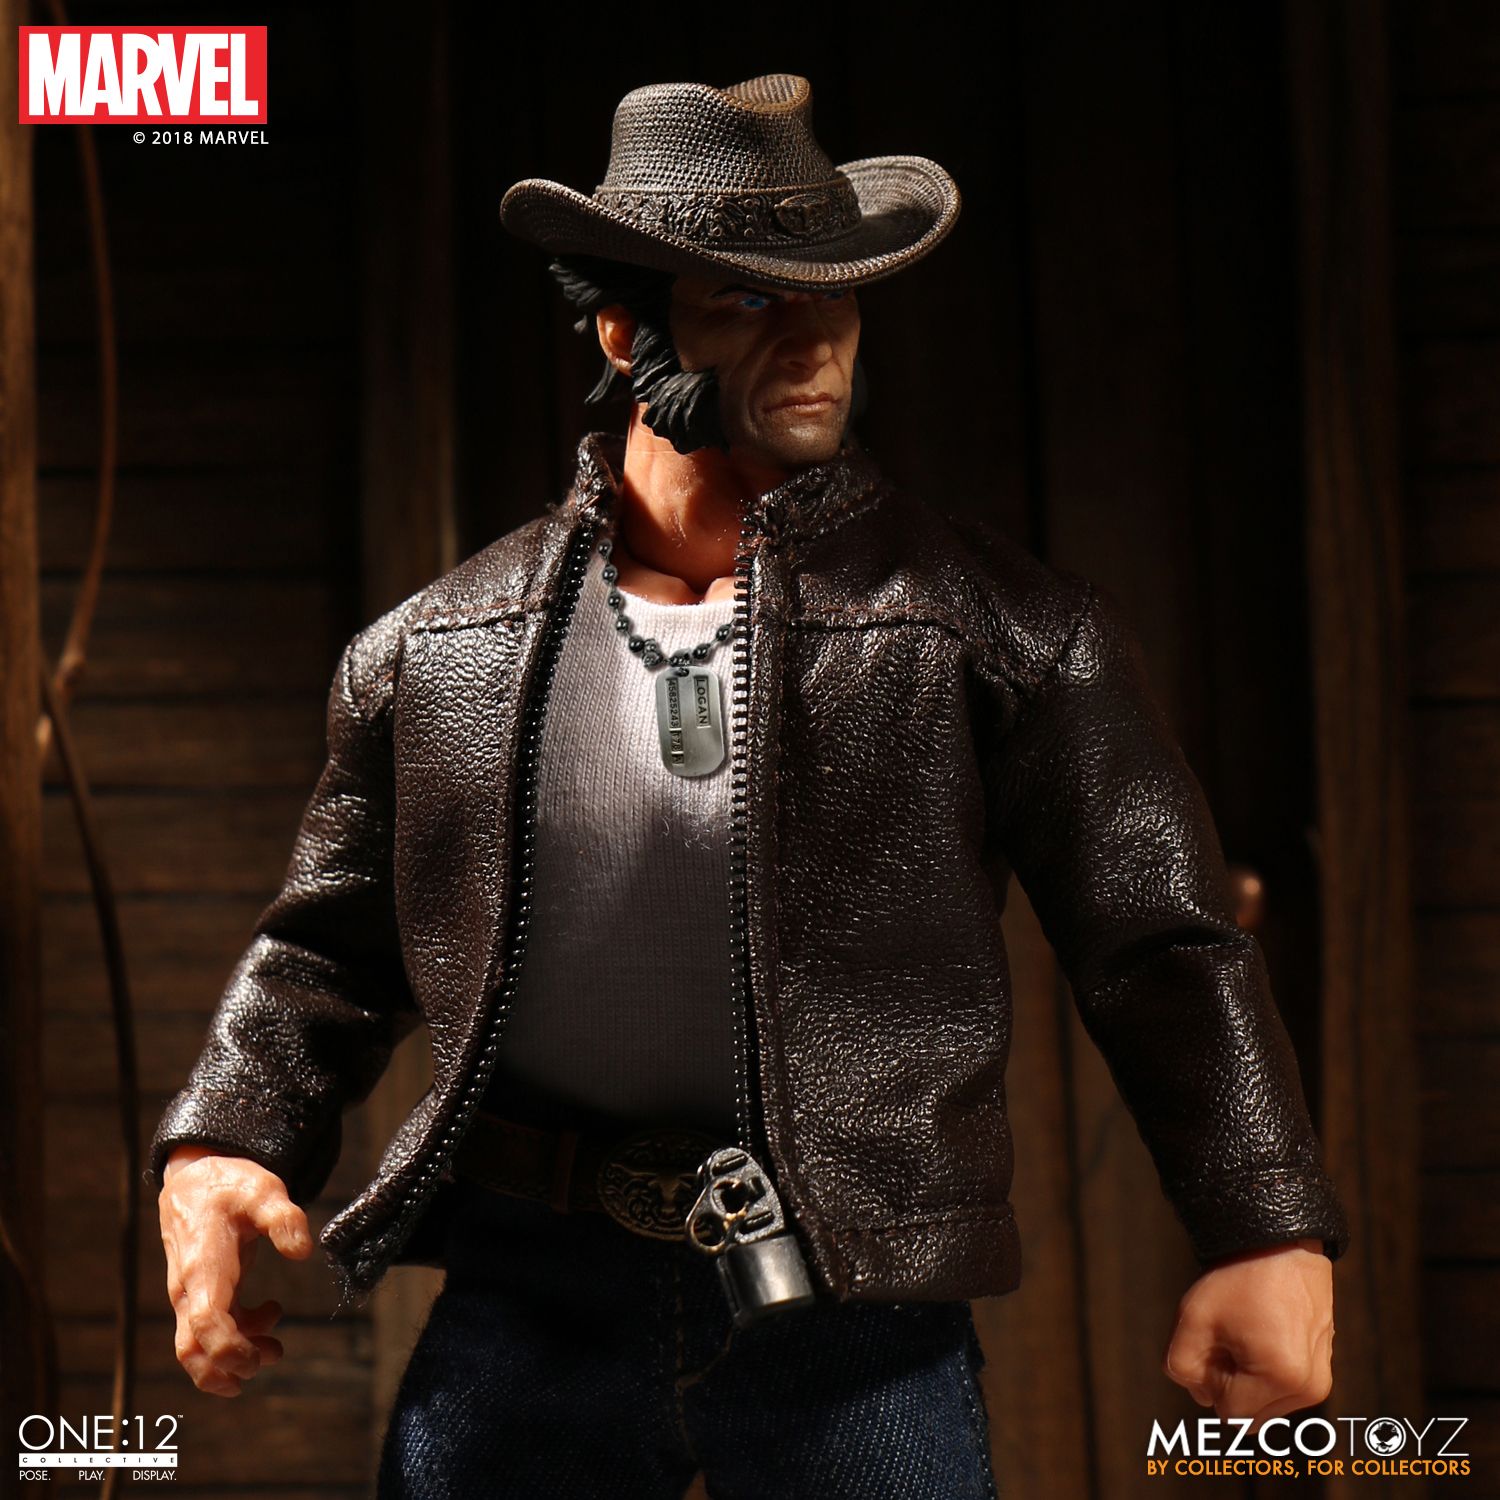 PAIR OF JEANS WITH BELT & WHITE TANK TOP Details about   Mezco One:12 LOGAN 